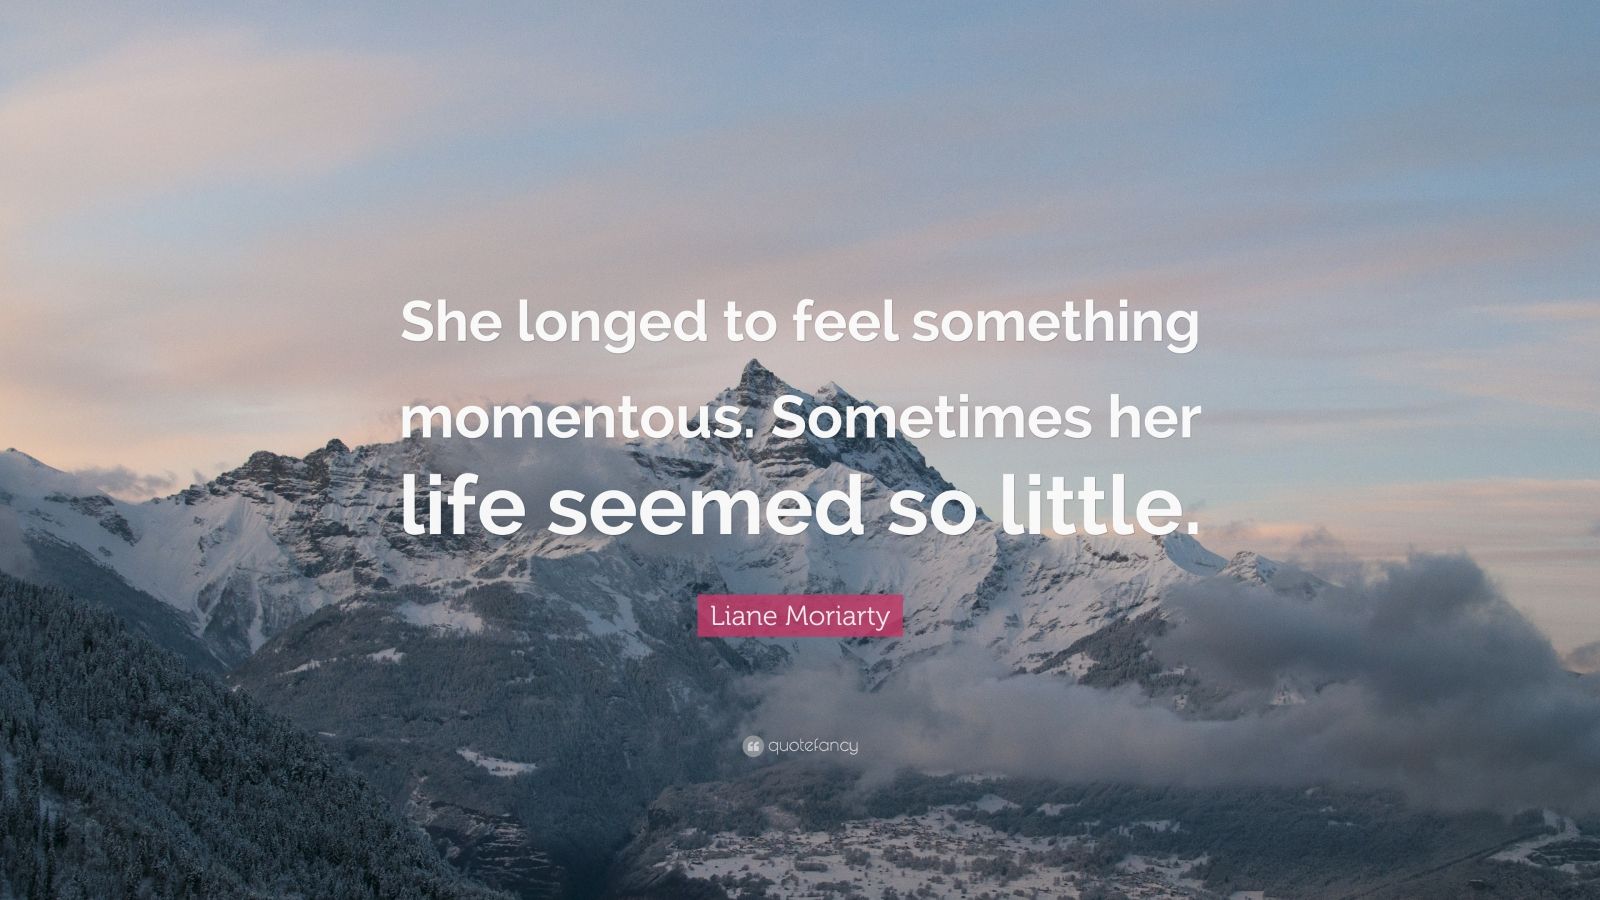 Liane Moriarty Quote: “She longed to feel something momentous ...